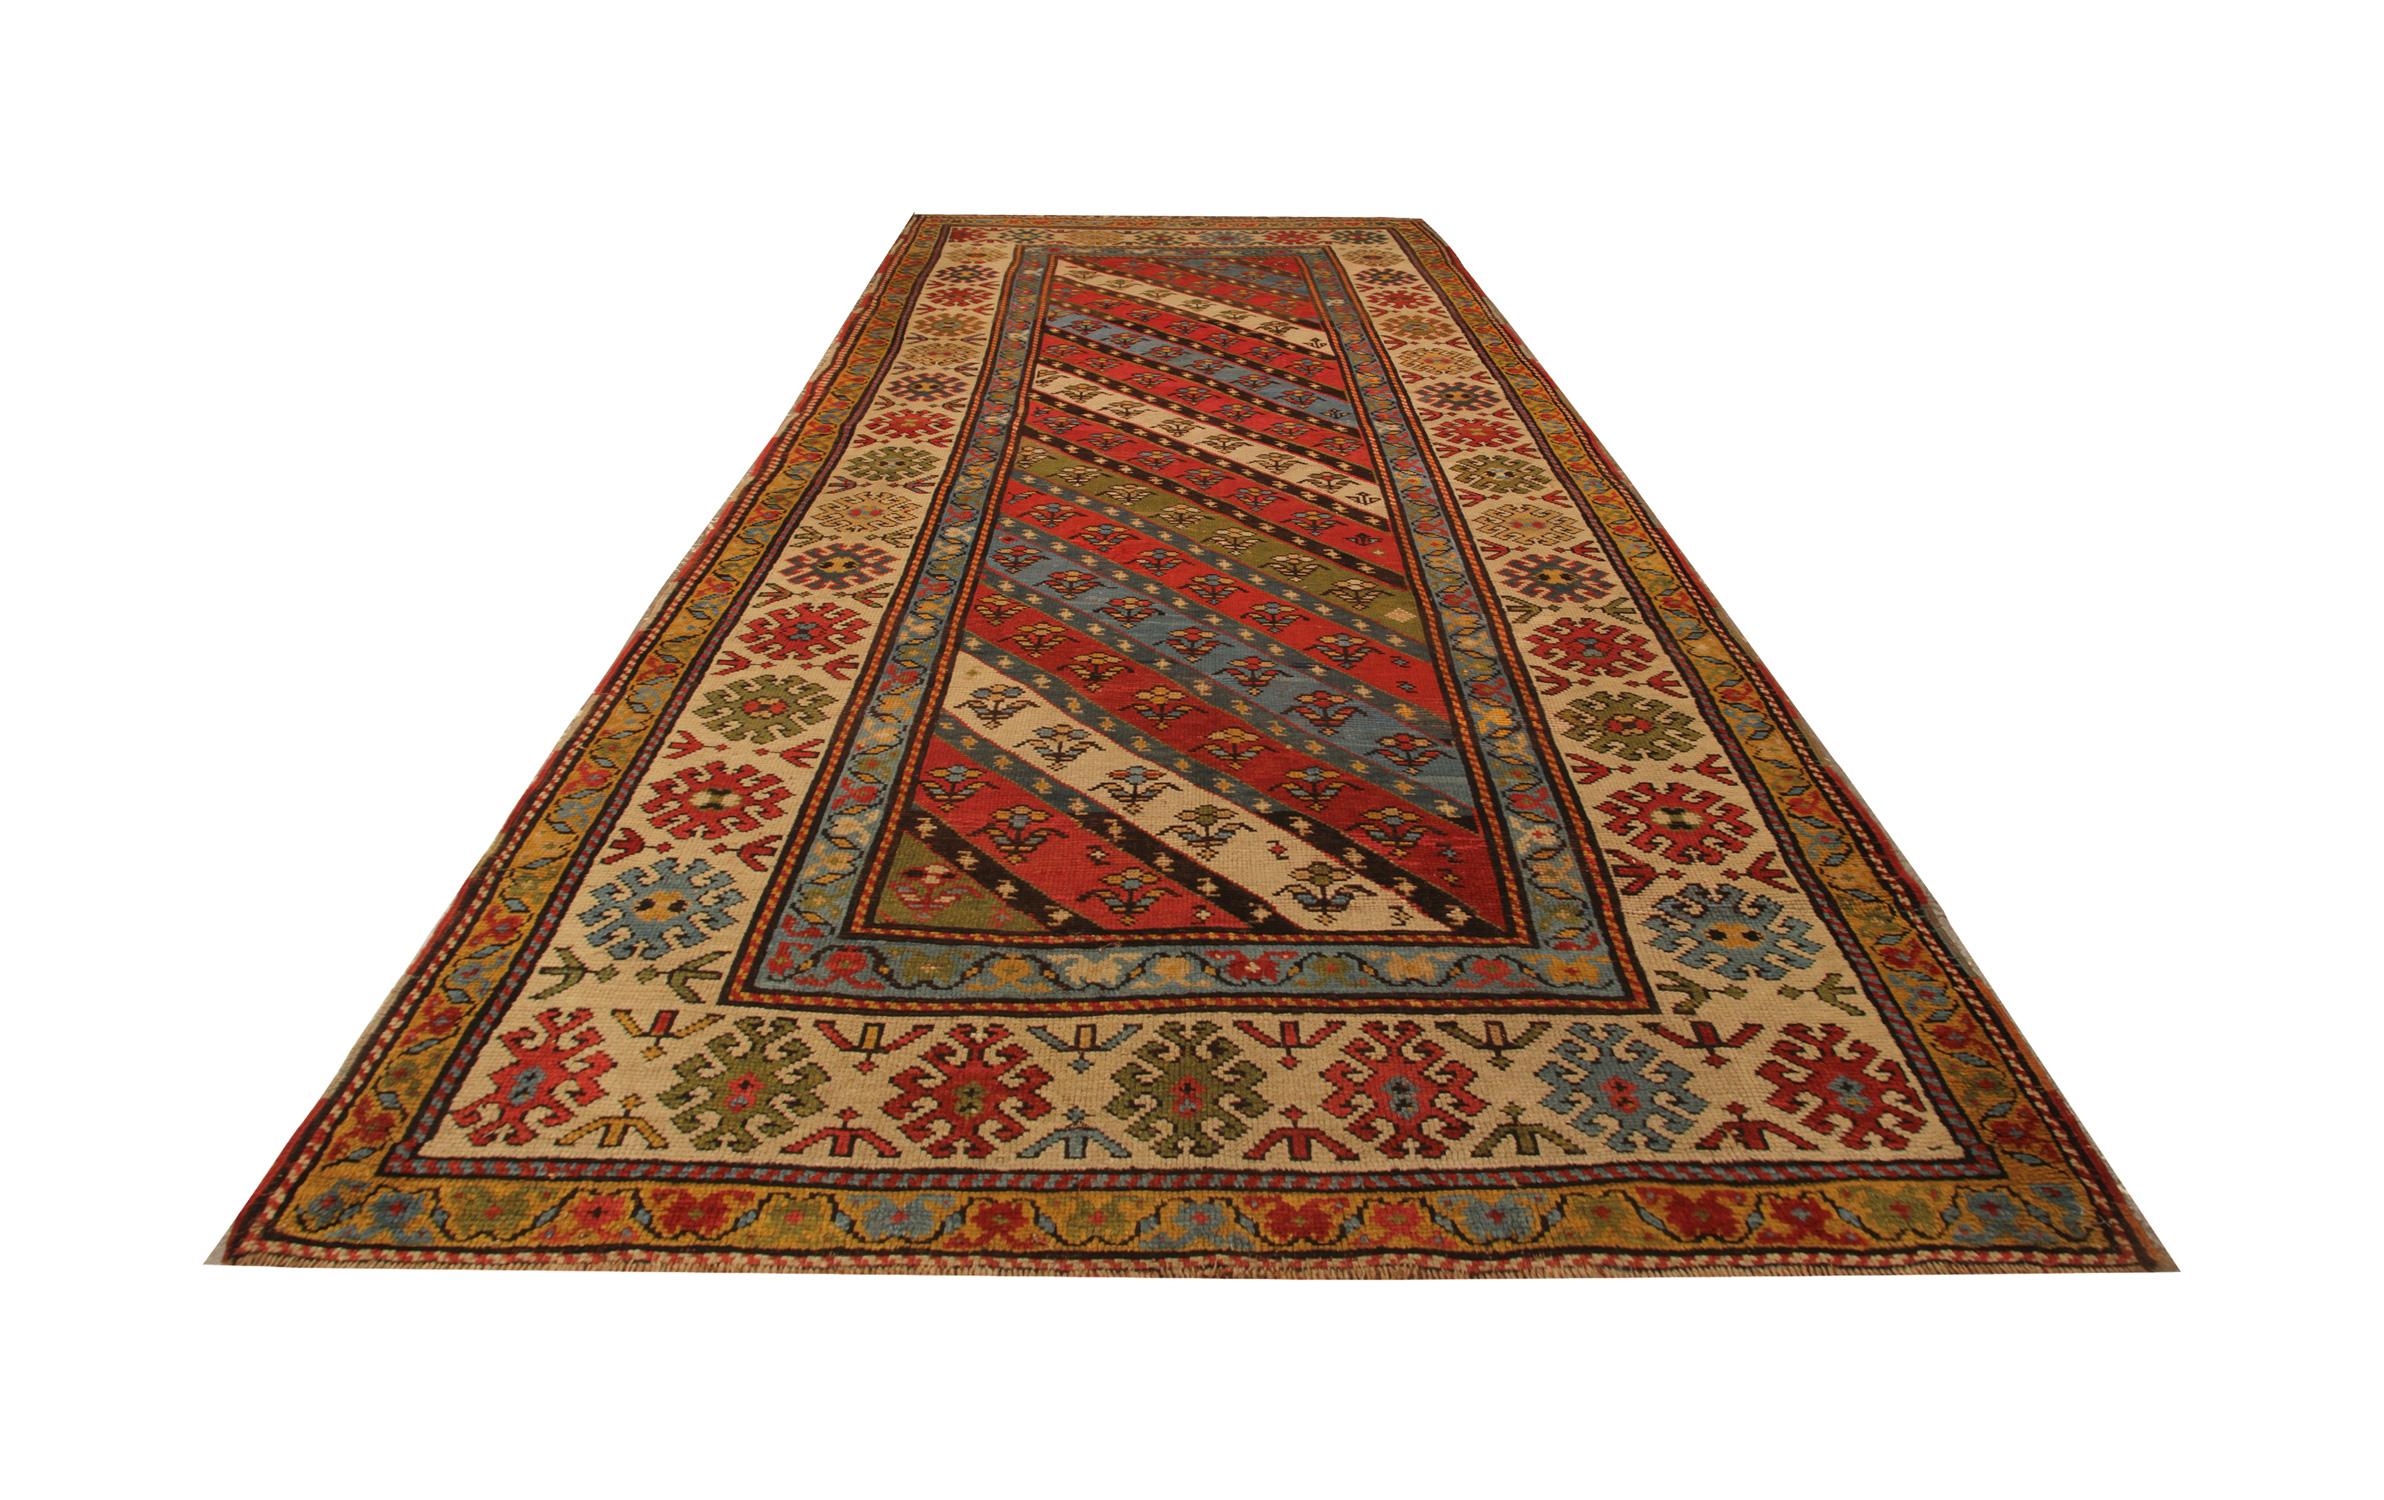 An excellent example of traditional Caucasian carpet rug weaving from the Kazak region. These medallion-patterned rugs can make a great accessory for your home interior. They add a cosy, warm feeling to any environment because of the great range of